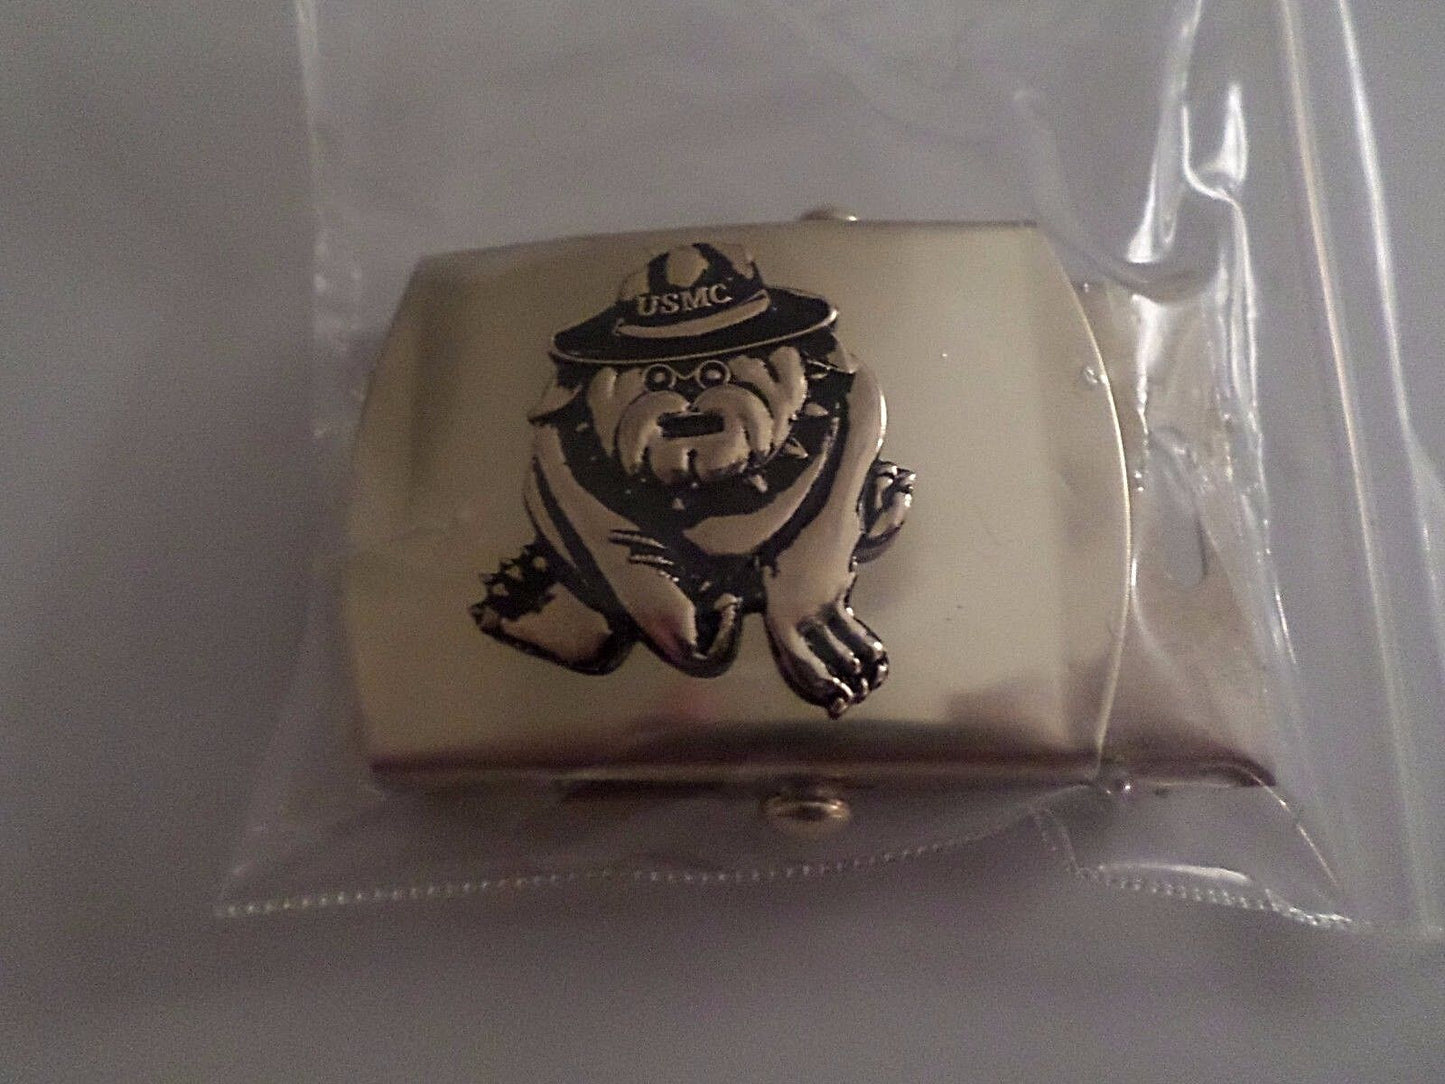 U.S MILITARY MARINE CORPS BULL DOG SOLID BRASS BELT BUCKLE MADE IN THE U.S.A